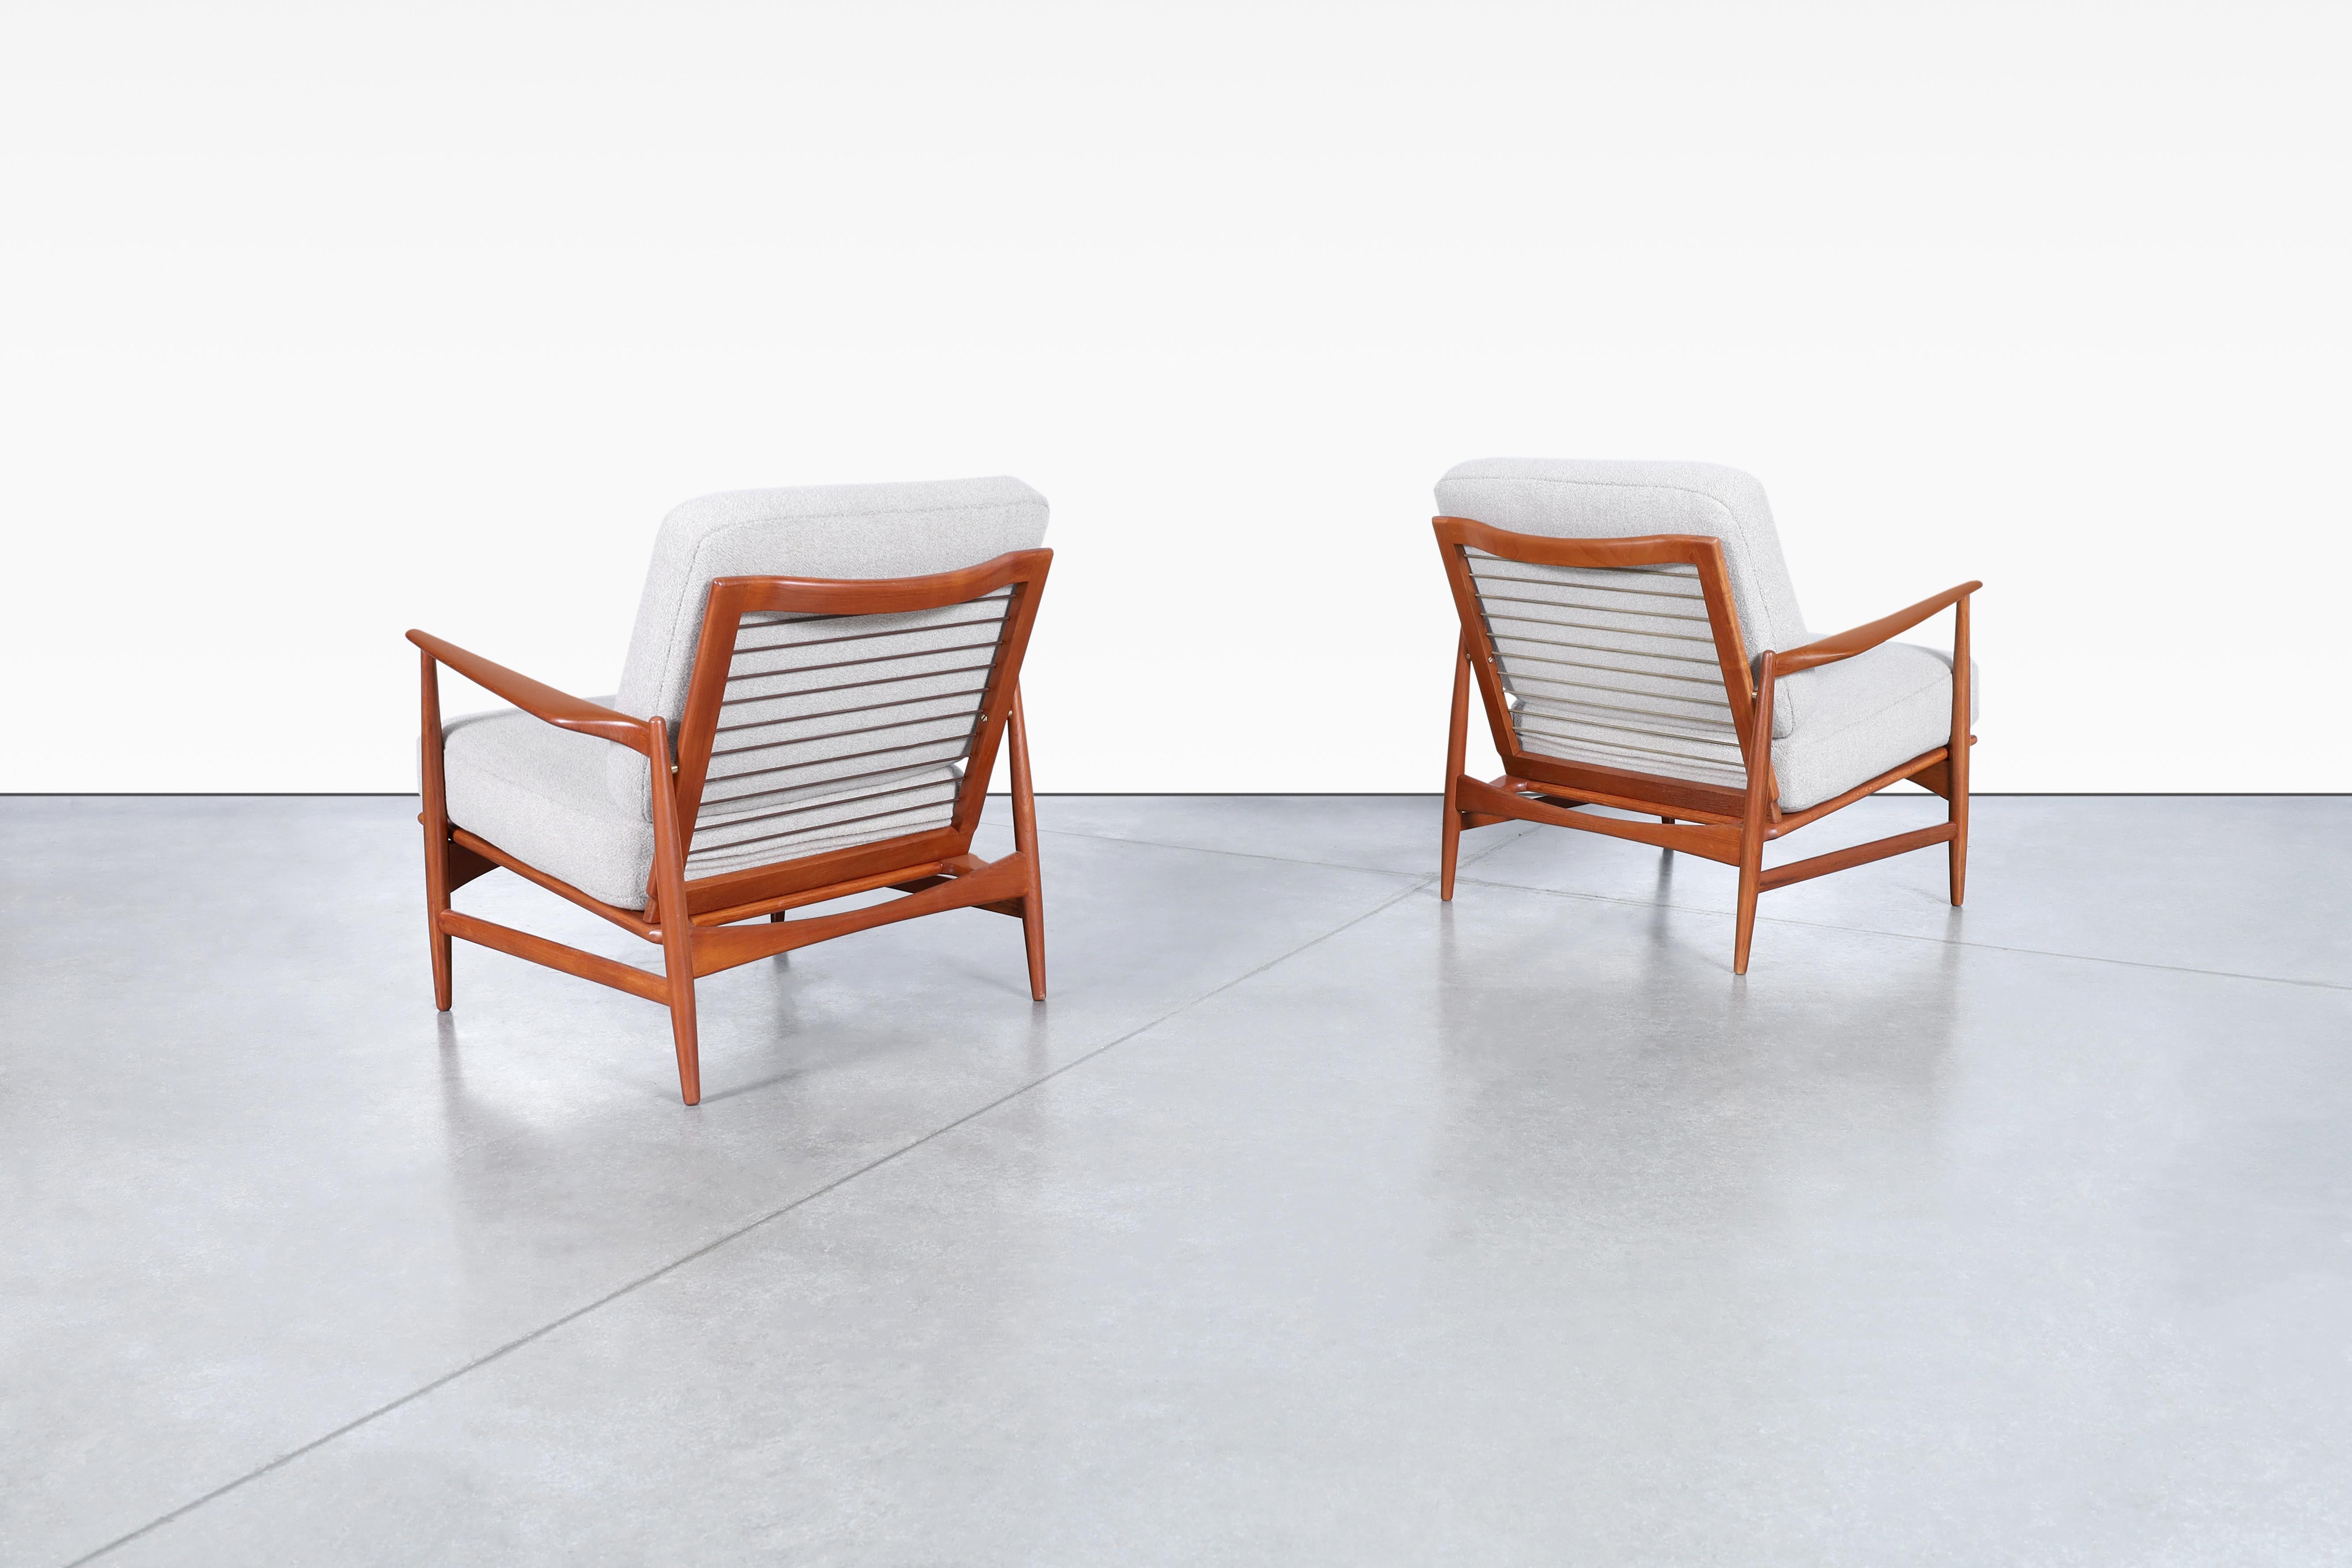 Mid-20th Century Danish Modern Teak Lounge Chairs by Ib Kofod Larsen for Selig For Sale